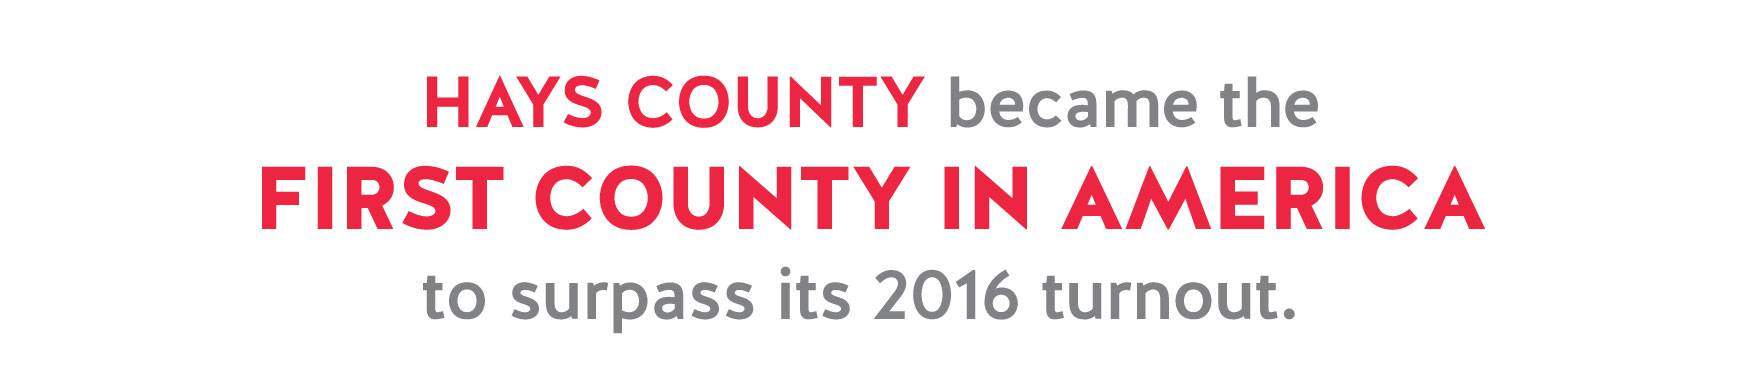 Hays County became the first county in America to surpass its 2016 turnout.